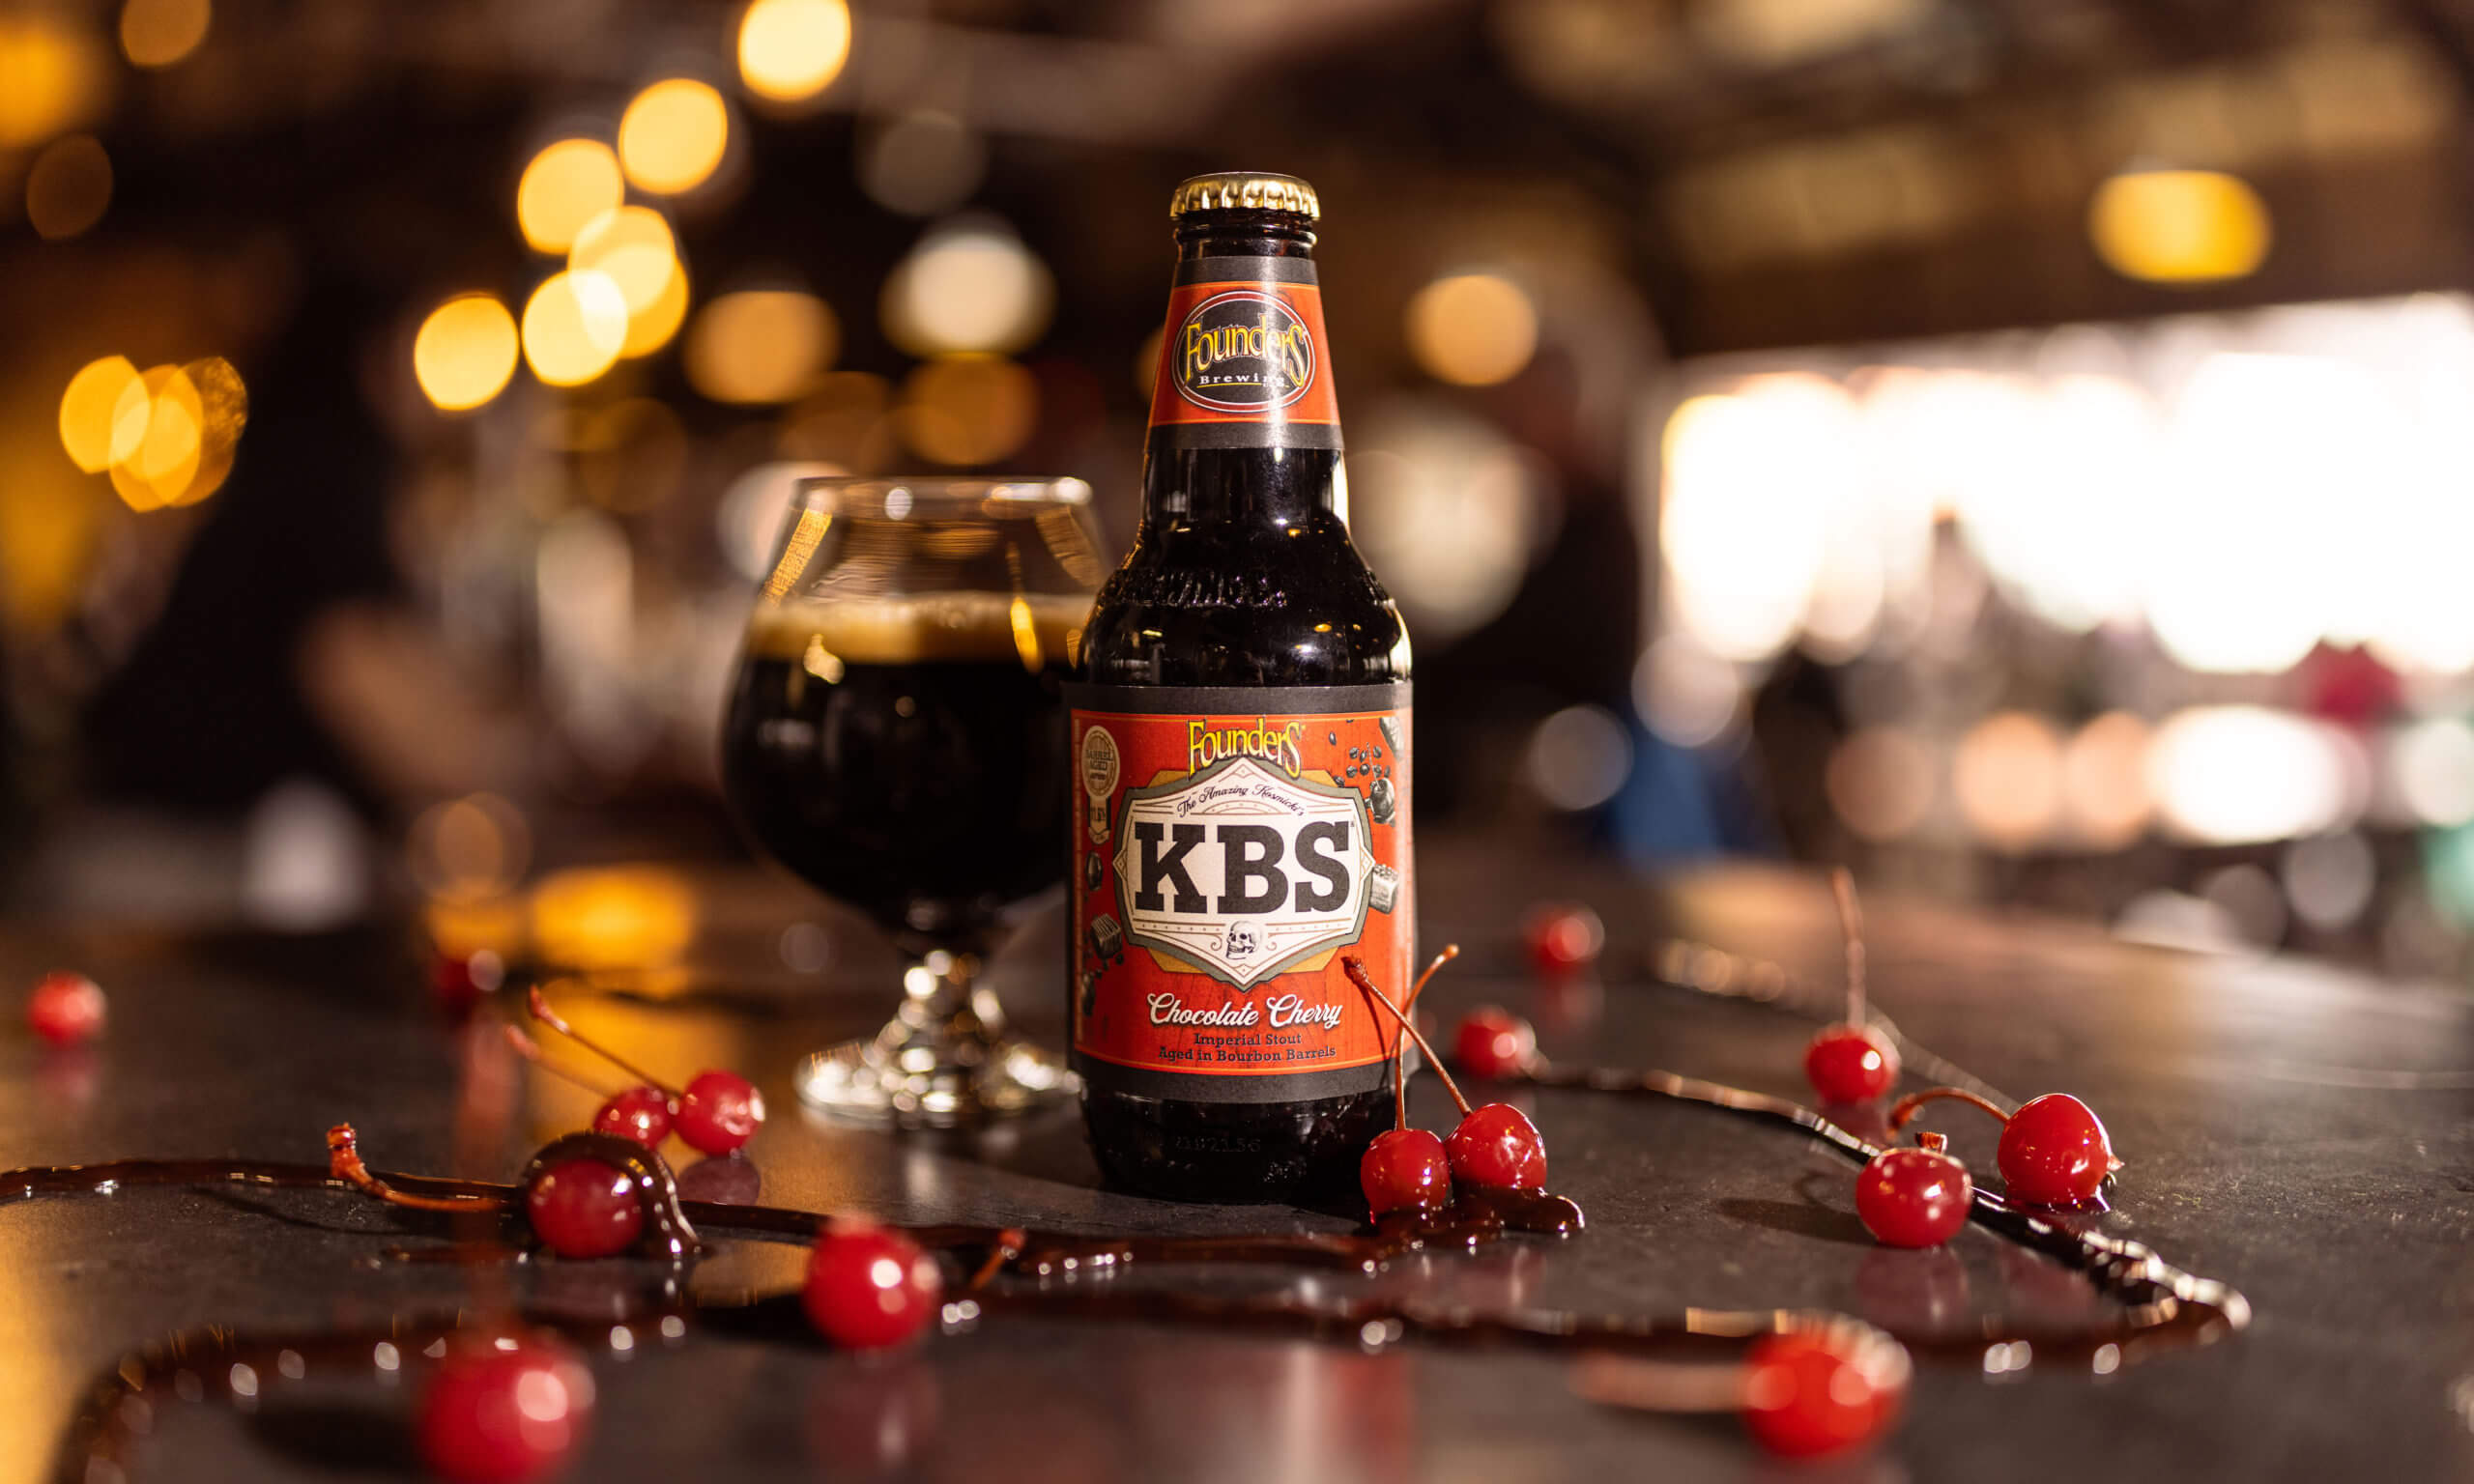 Bottle of KBS Chocolate Cherry and snifter pour on a table surrounded by cherries and chocolate sauce